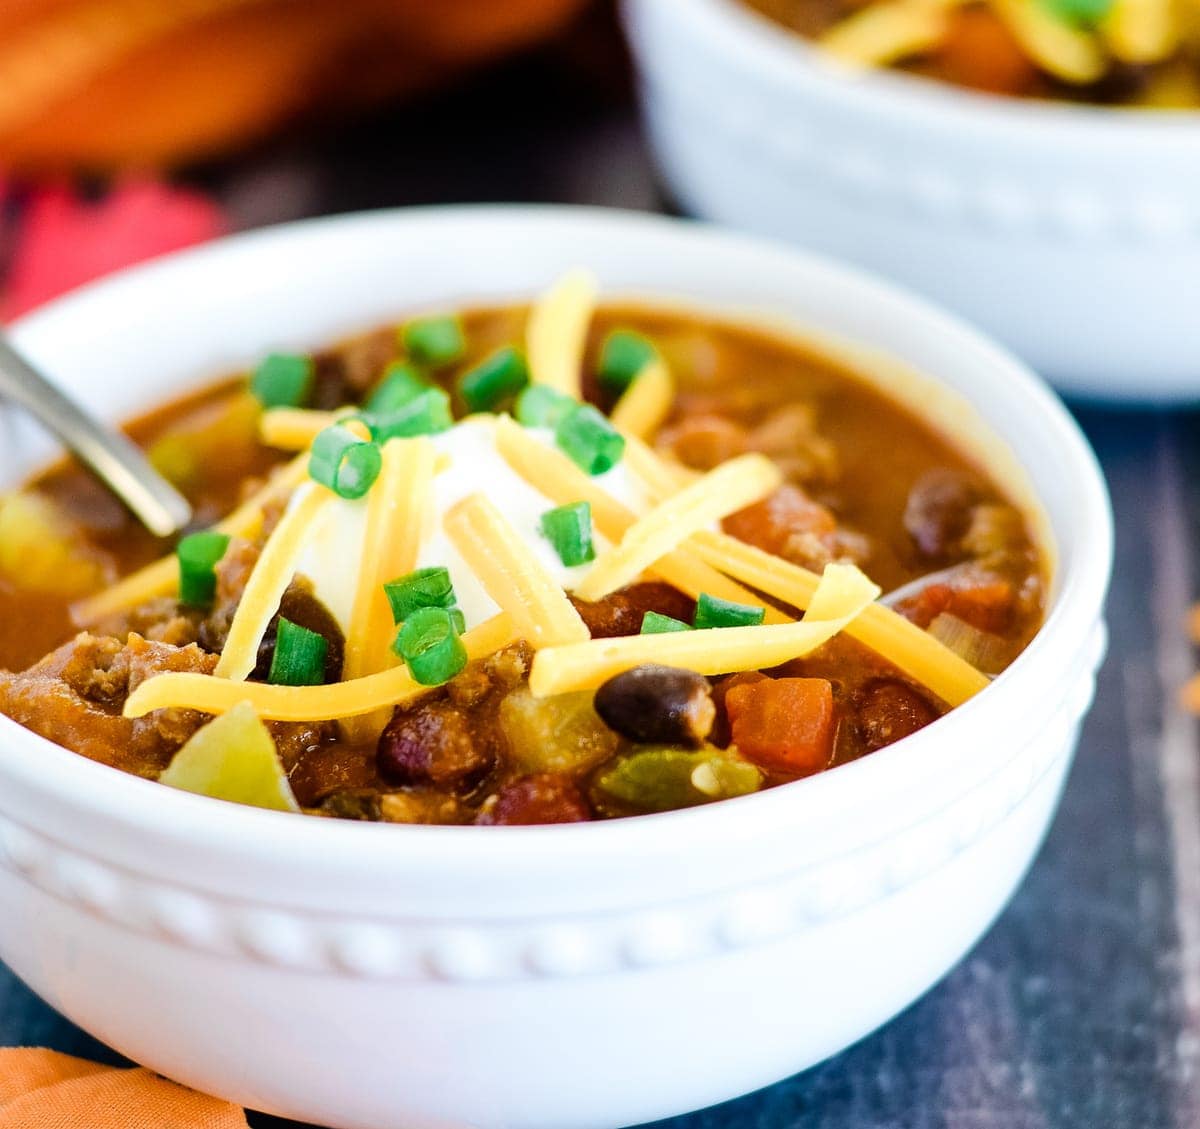 Chili recipes - bowl of pumpkin chili topped with cheese and green onionl.